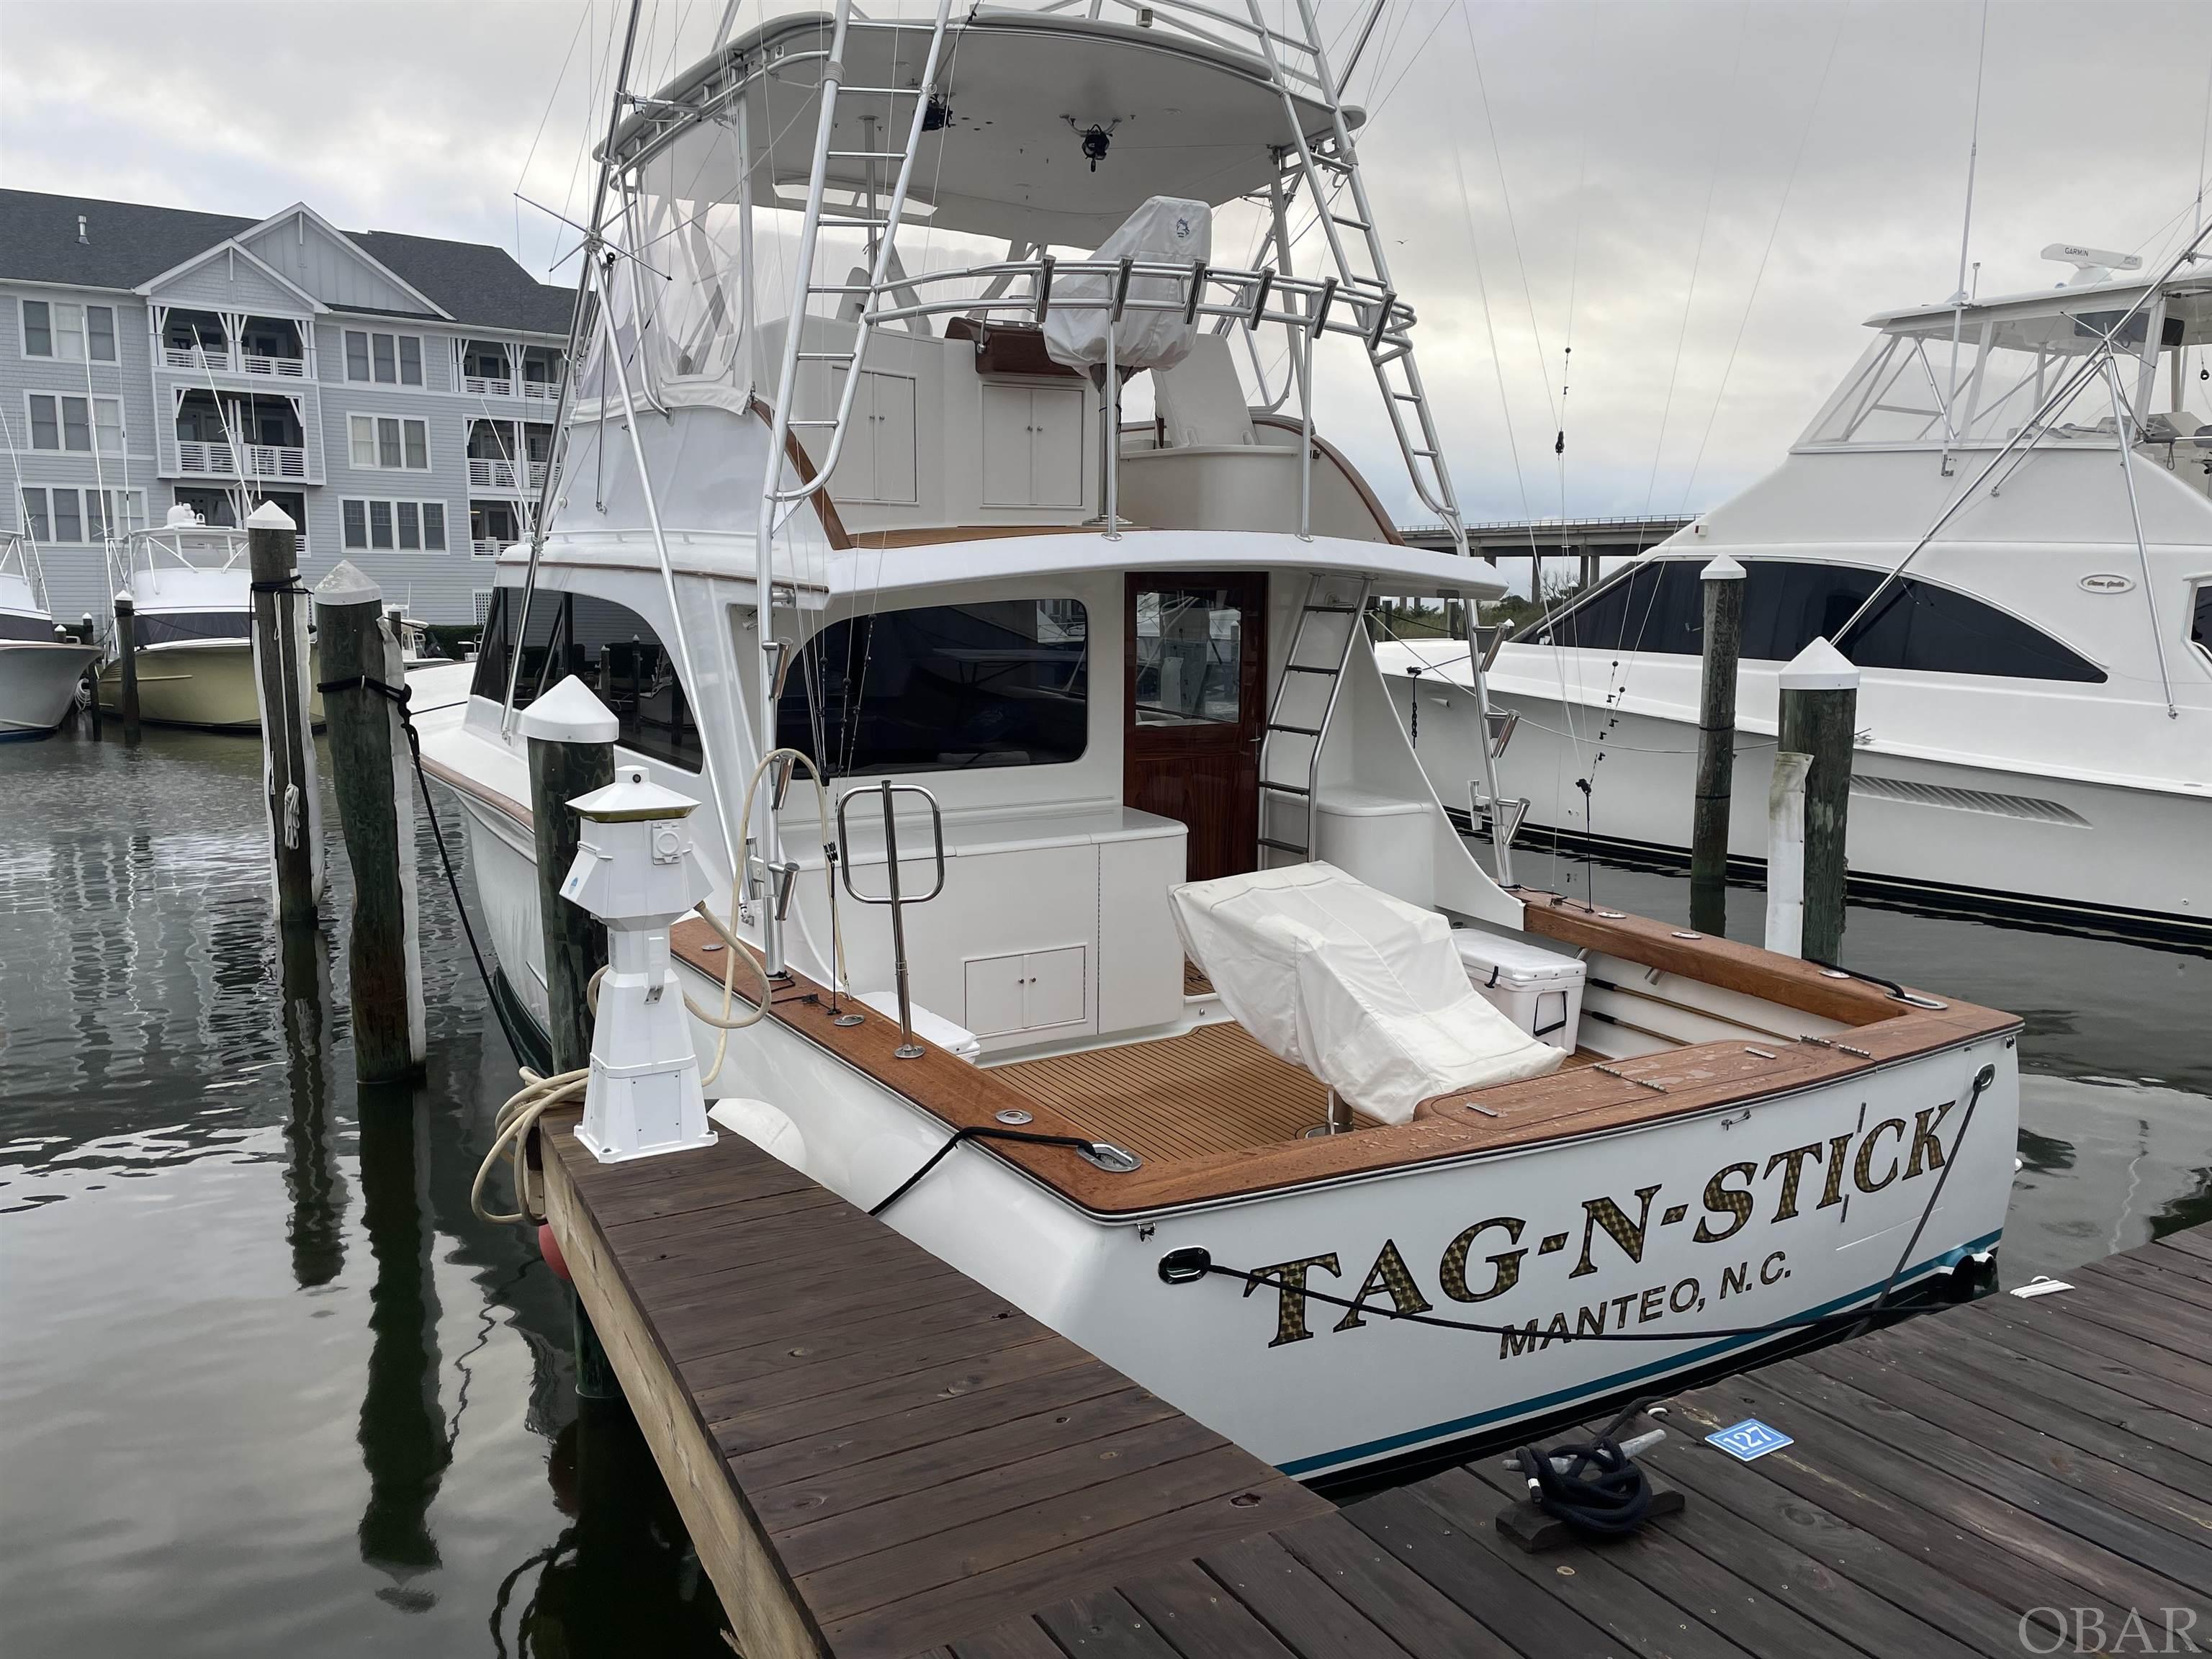 This is an opportunity to purchase a boat slip in Pirate's Cove Marina, a world class boating community. This boat slip is situated on D-dock, spanning 55x18 in size with in-slip fueling. Its prime location offers convenient access to the fish cleaning station, a paved parking lot, and various amenities such as a Ship's store, with light provisions, clothing and gifts, Mimi's Tiki Hut, and Bluewater Bar and Grill, all within walking distance.  Pirate's Cove Marina is approximately eight miles inside and north of Oregon Inlet, accessible via a well-marked channel. For added recreational enjoyment, you have to option to purchase amenity passes from Pirate's Cove Recreation Center. This grants you and your family access to our swimming pool, playground and fitness center.